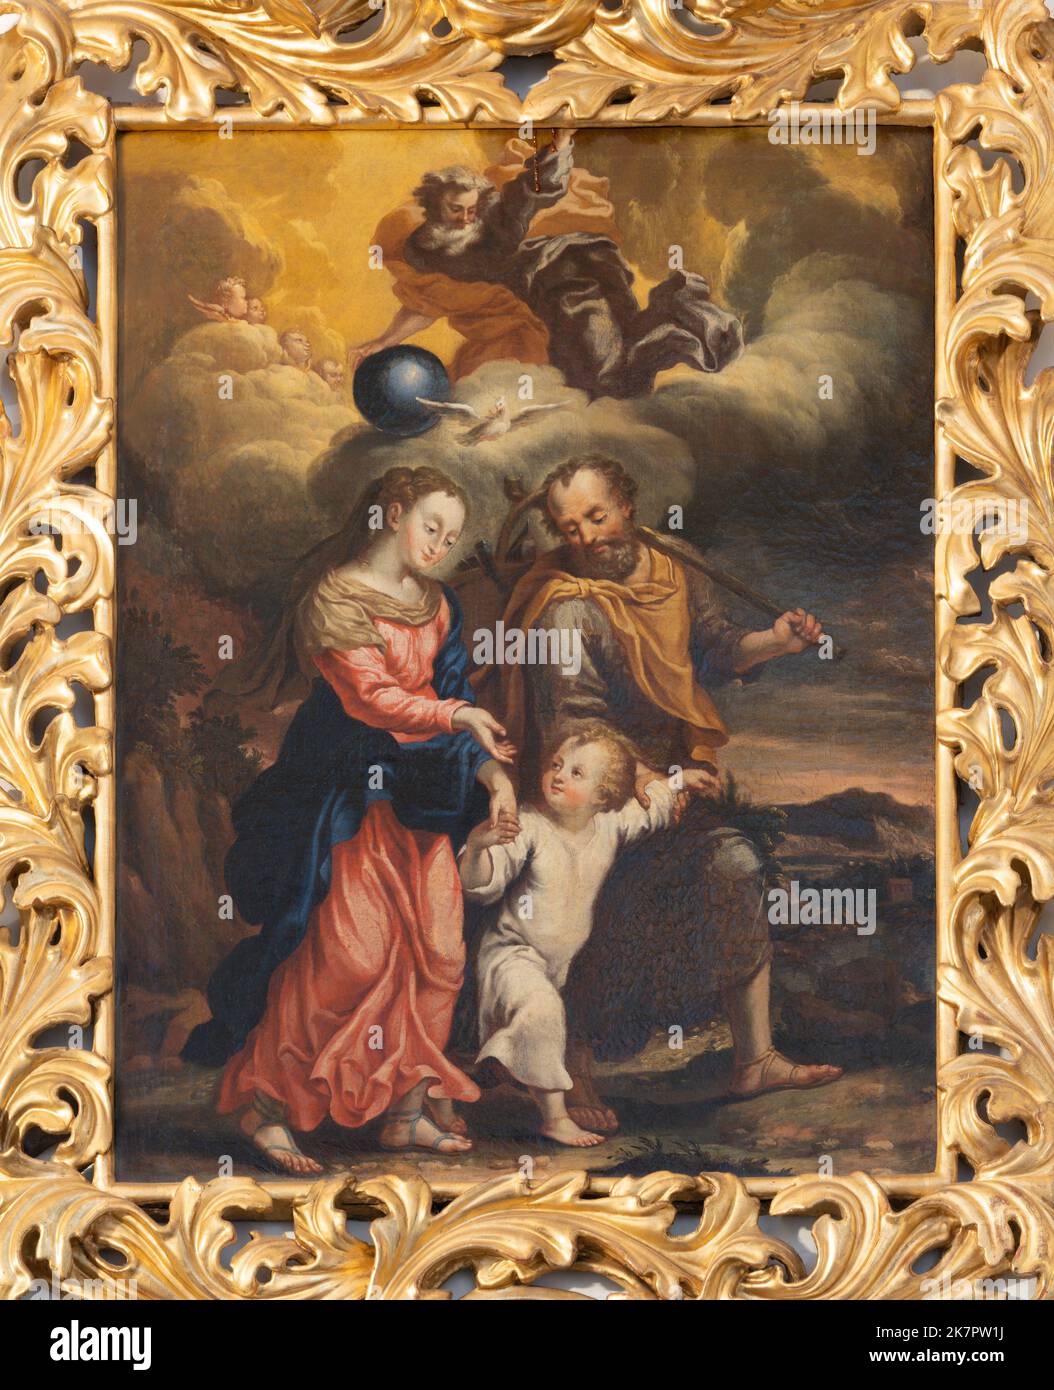 LUZERN, SWITZERLAND - JUNY 24, 2022: The painitng of Holy Family in the Jesuitenkirche by unknown artist. Stock Photo